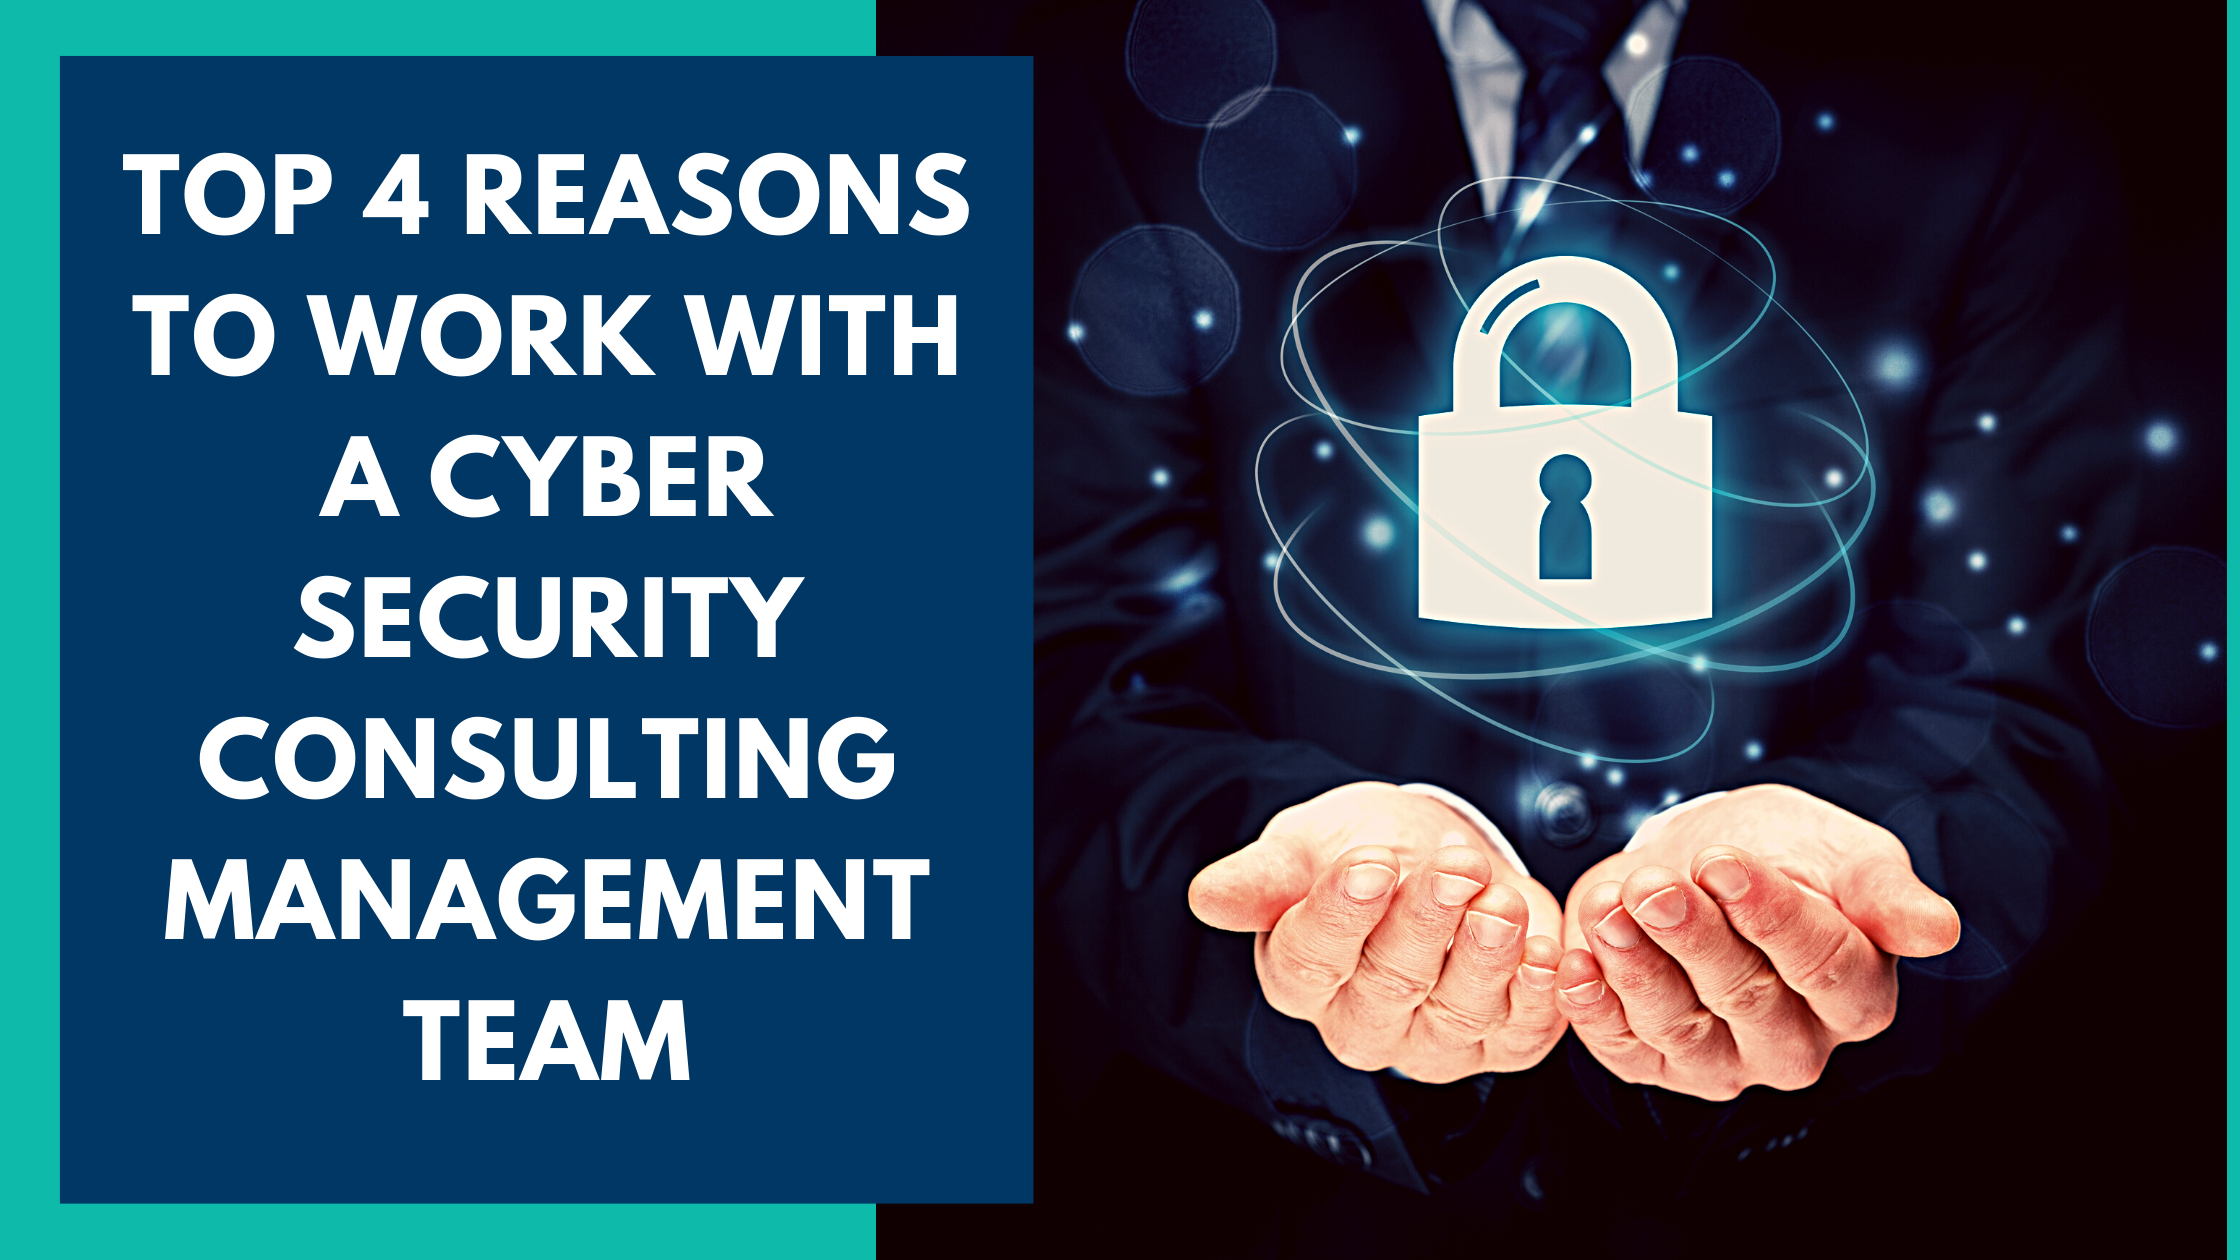 Top 4 Reasons to Work with a CyberSecurity Cnsulting Team